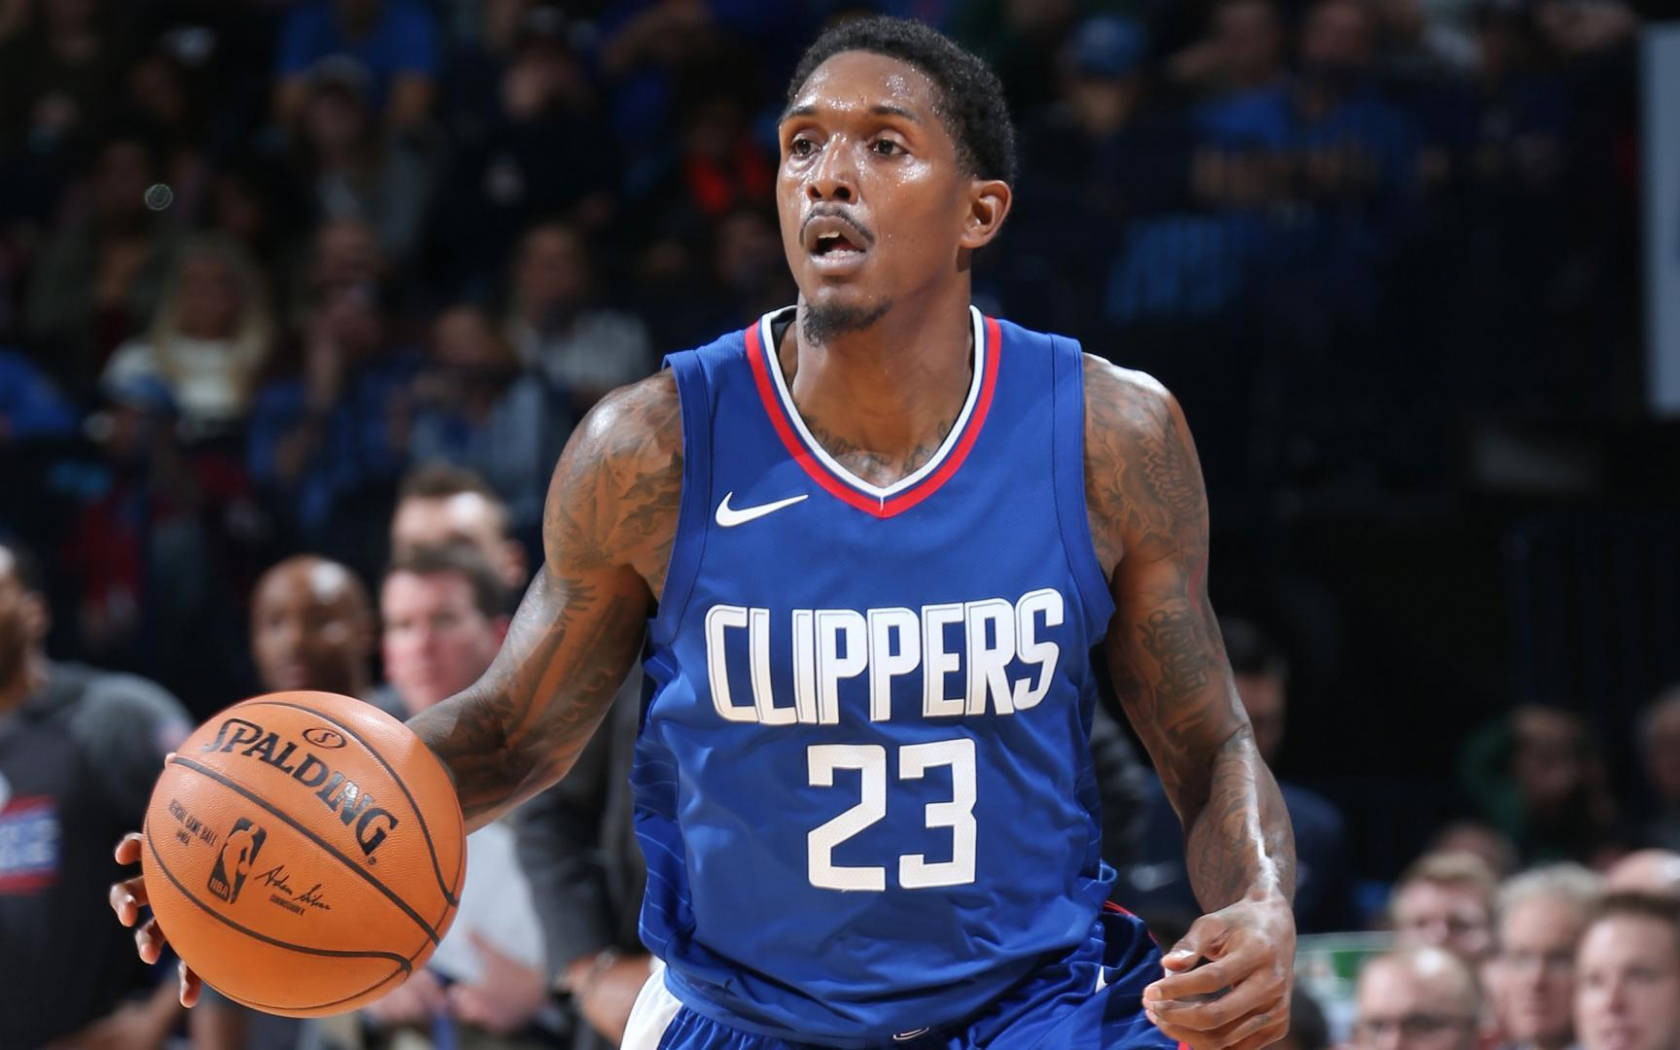 Lou Williams Bright Blue Clippers Jersey Wallpaper